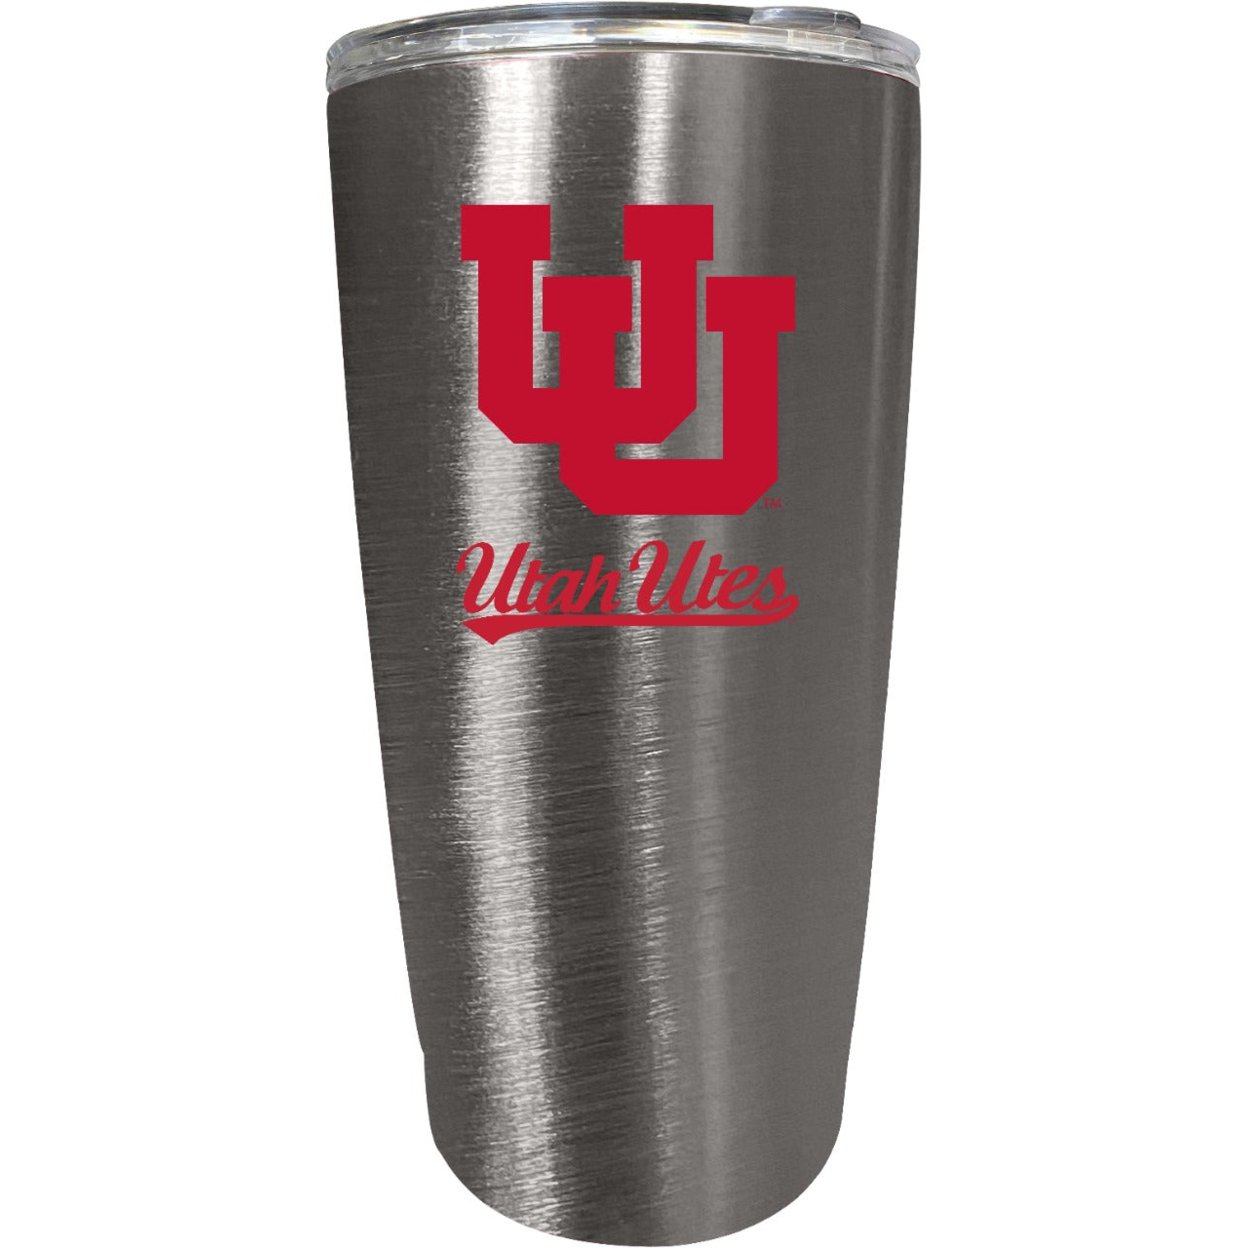 Utah Utes 16 Oz Insulated Stainless Steel Tumbler Colorless